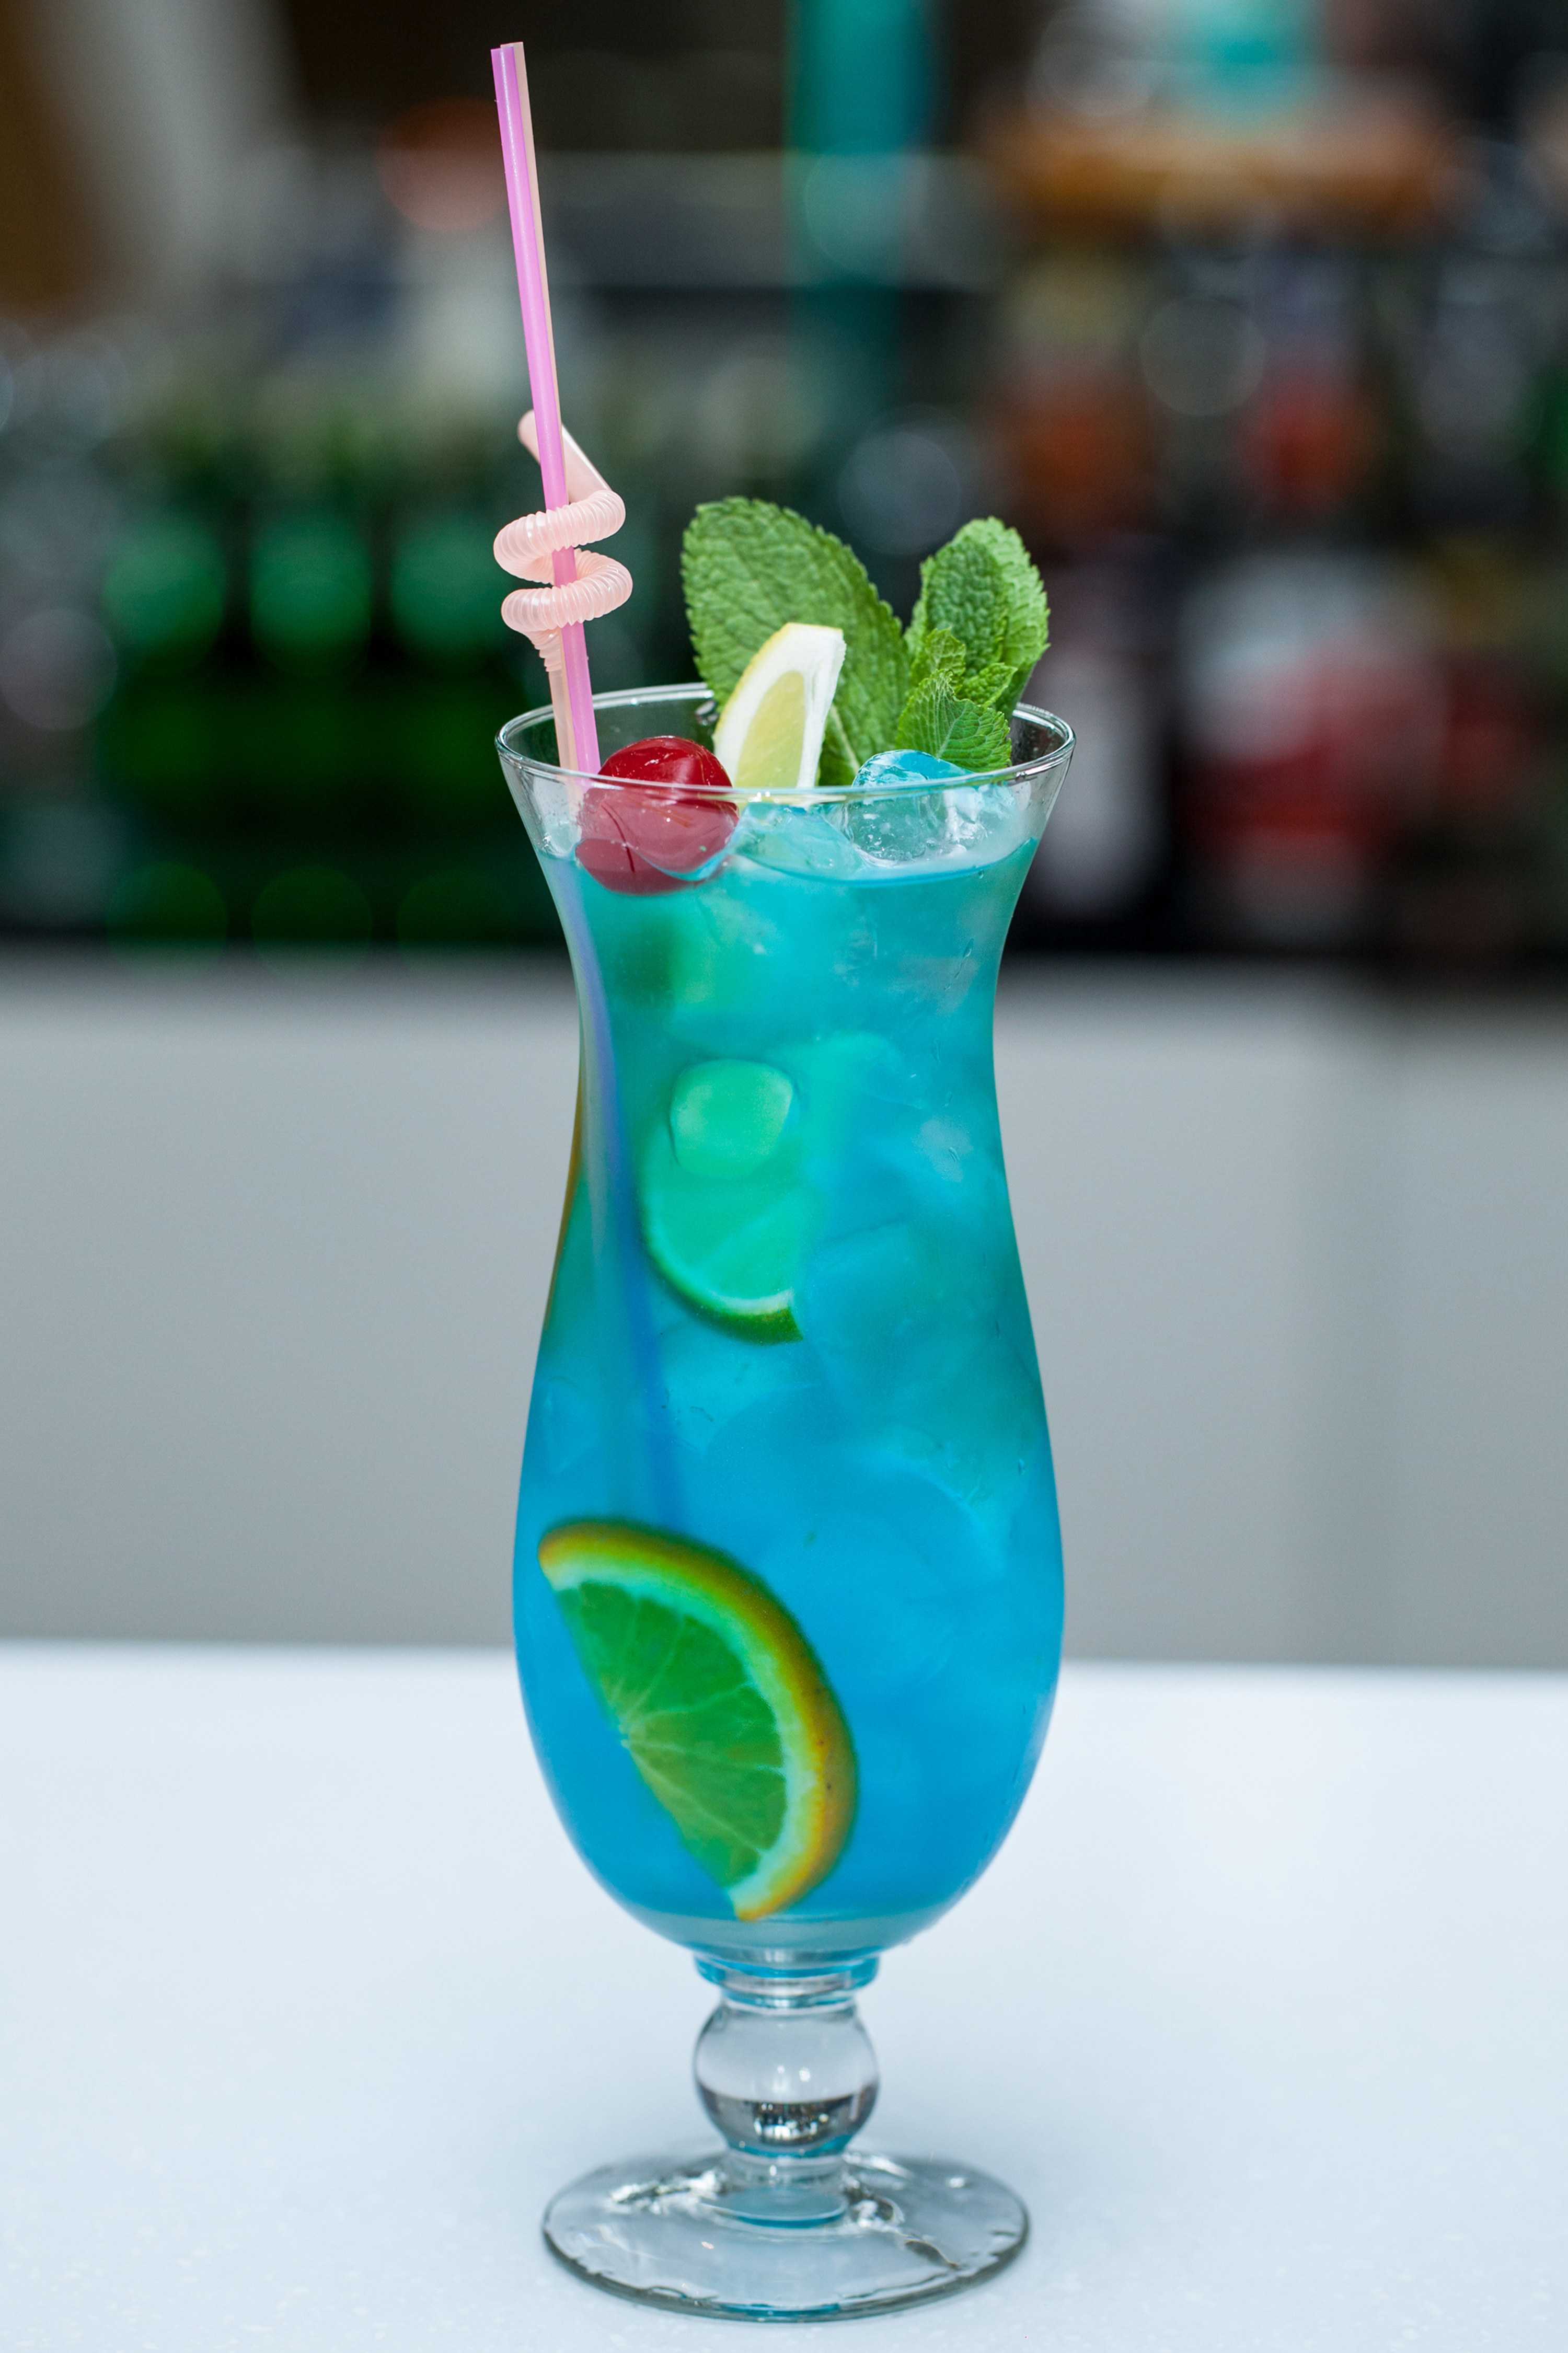 Glass filled with blue cocktail, a slice of lemon, mint leaves, a cherry, and a pink straw.